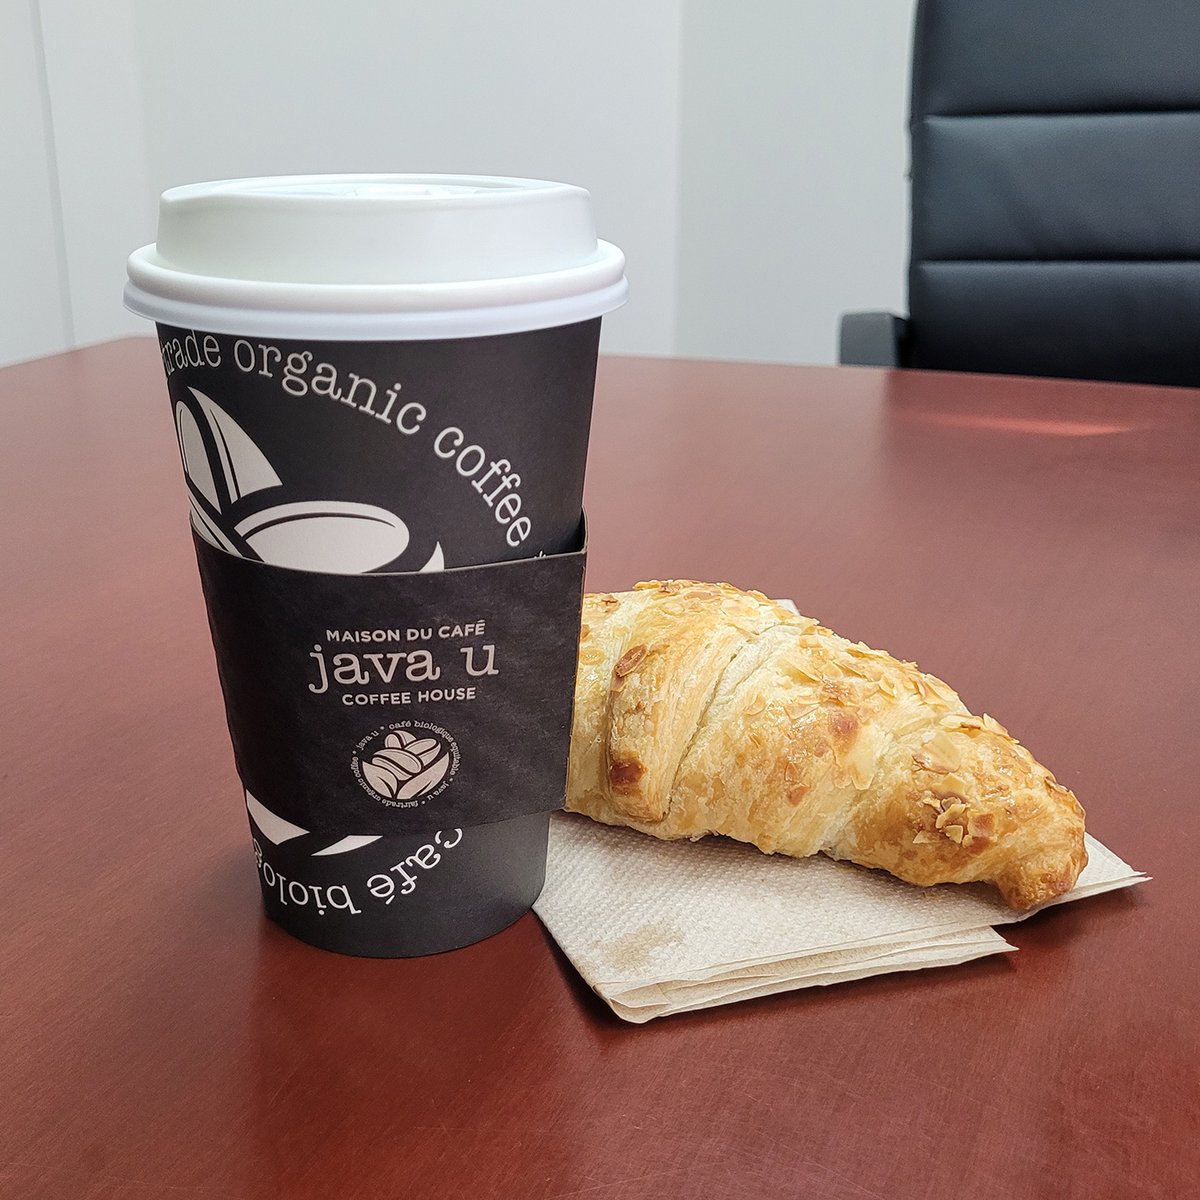 The best start to any day: Java U coffee + almond croissant 😍

Une journée bien entamée: Café Java U + croissant aux amandes 😍

#javau #fairtradeorganic #montreal #coffee #cafe #mtlcafe #fresh #coffeelover #coffeeshop #coffeehouse #coffeevibes #food #foodie #croissant